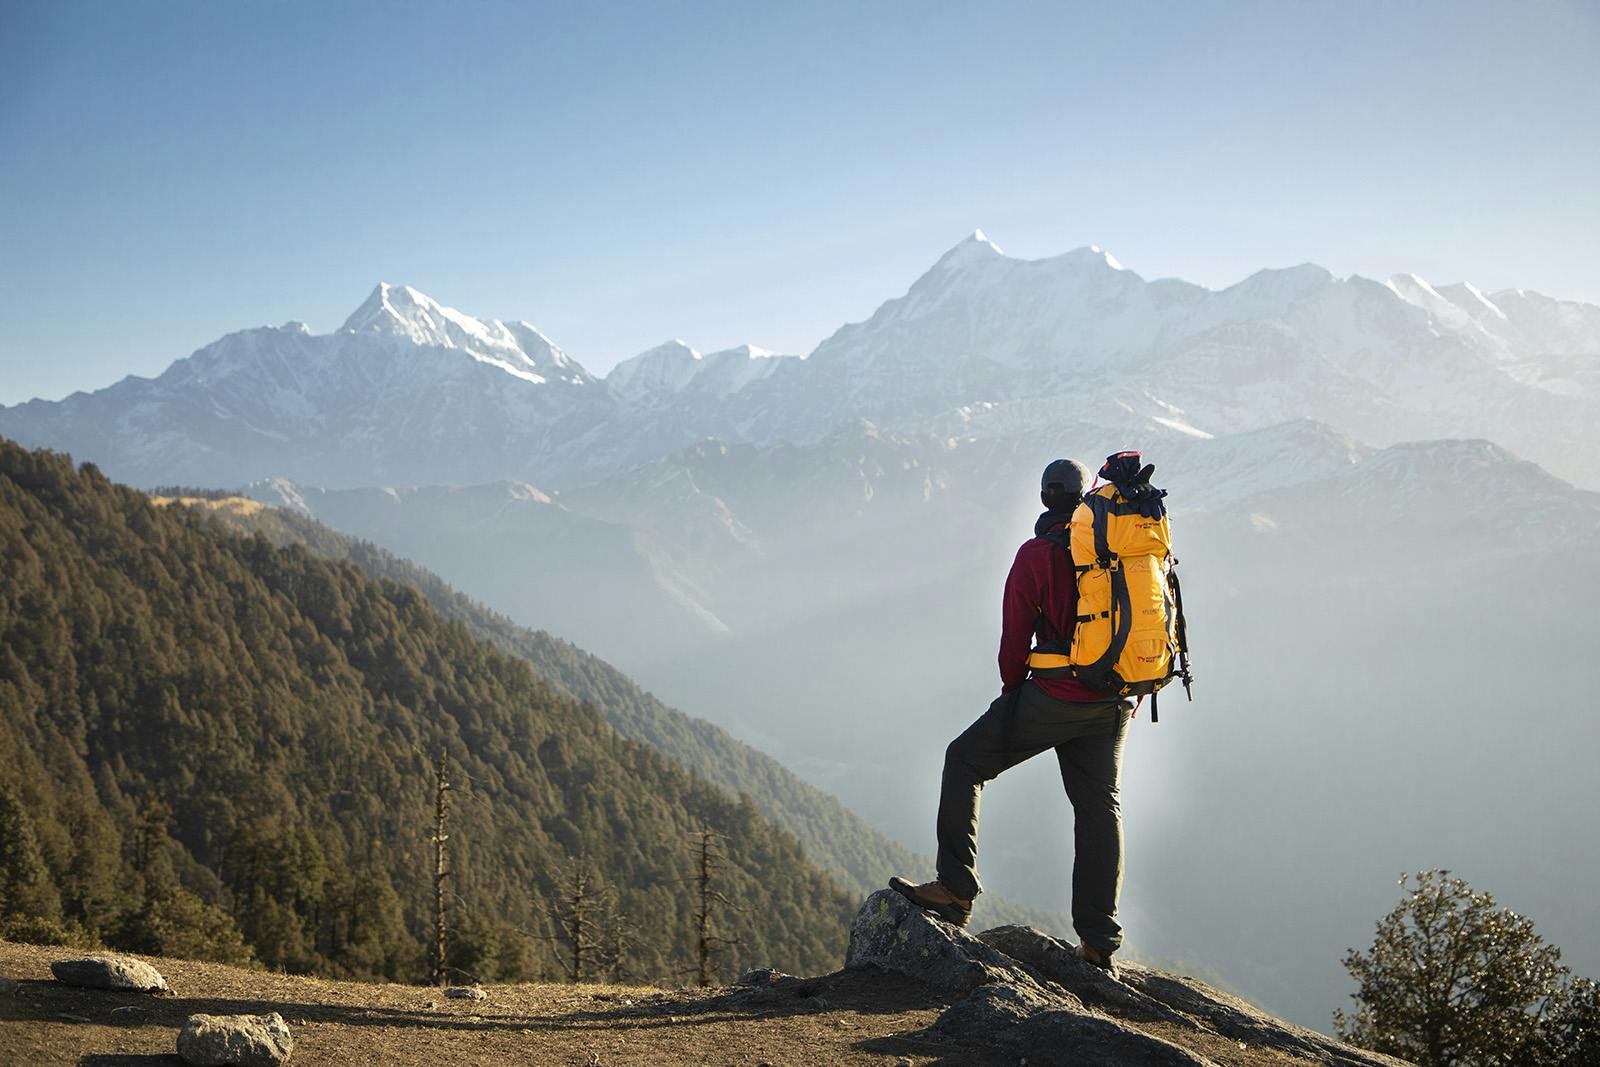 10 Best Daypacks for Hiking That Are Lightweight and Easy to Carry